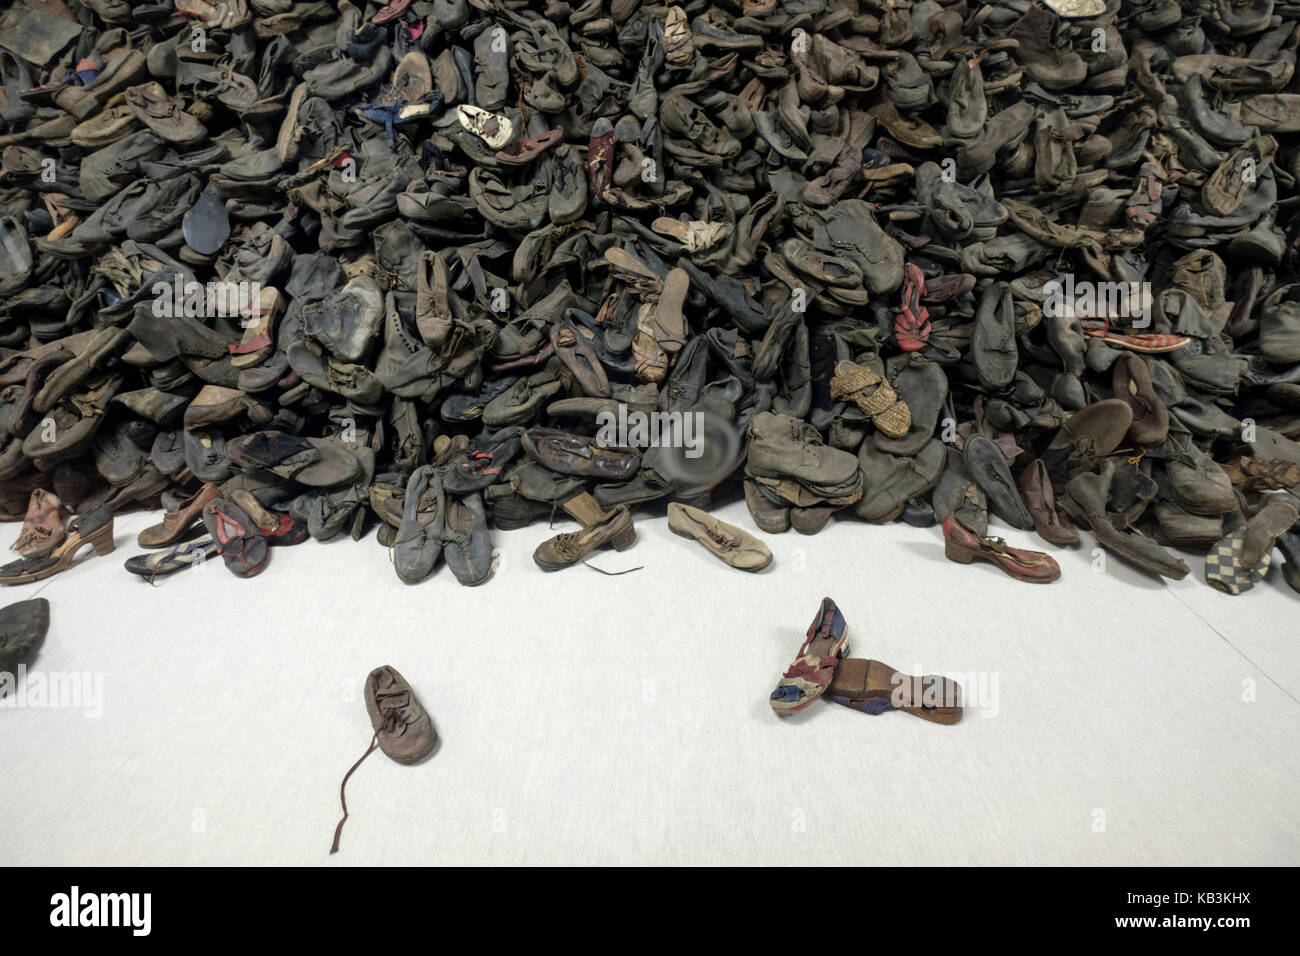 Pile of shoes belonging to prisoners at Auschwitz WWII Nazi concentration camp, Poland Stock Photo